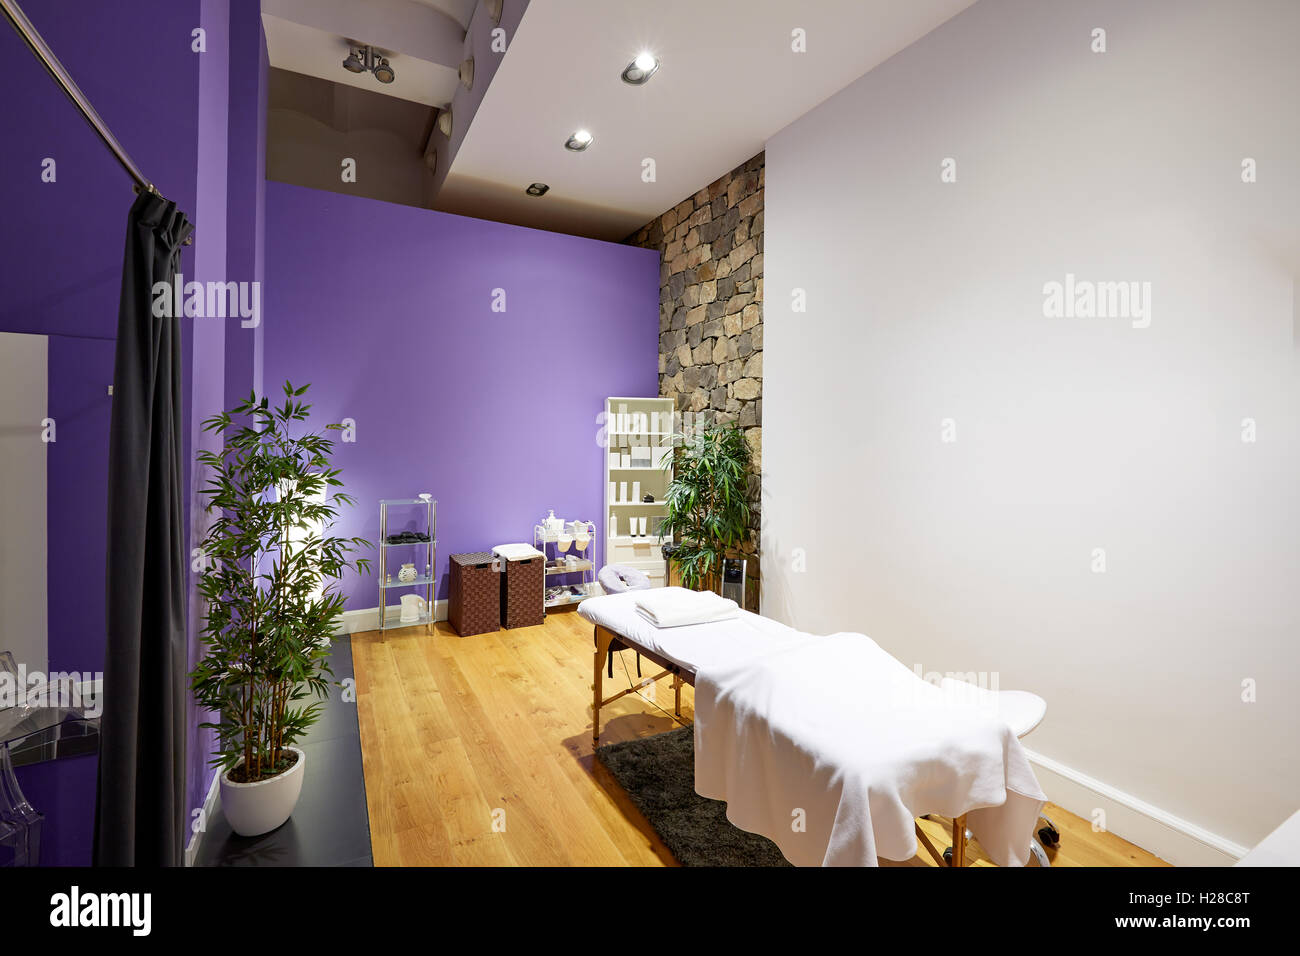 Massage room with massage table and products with stone wall Stock Photo